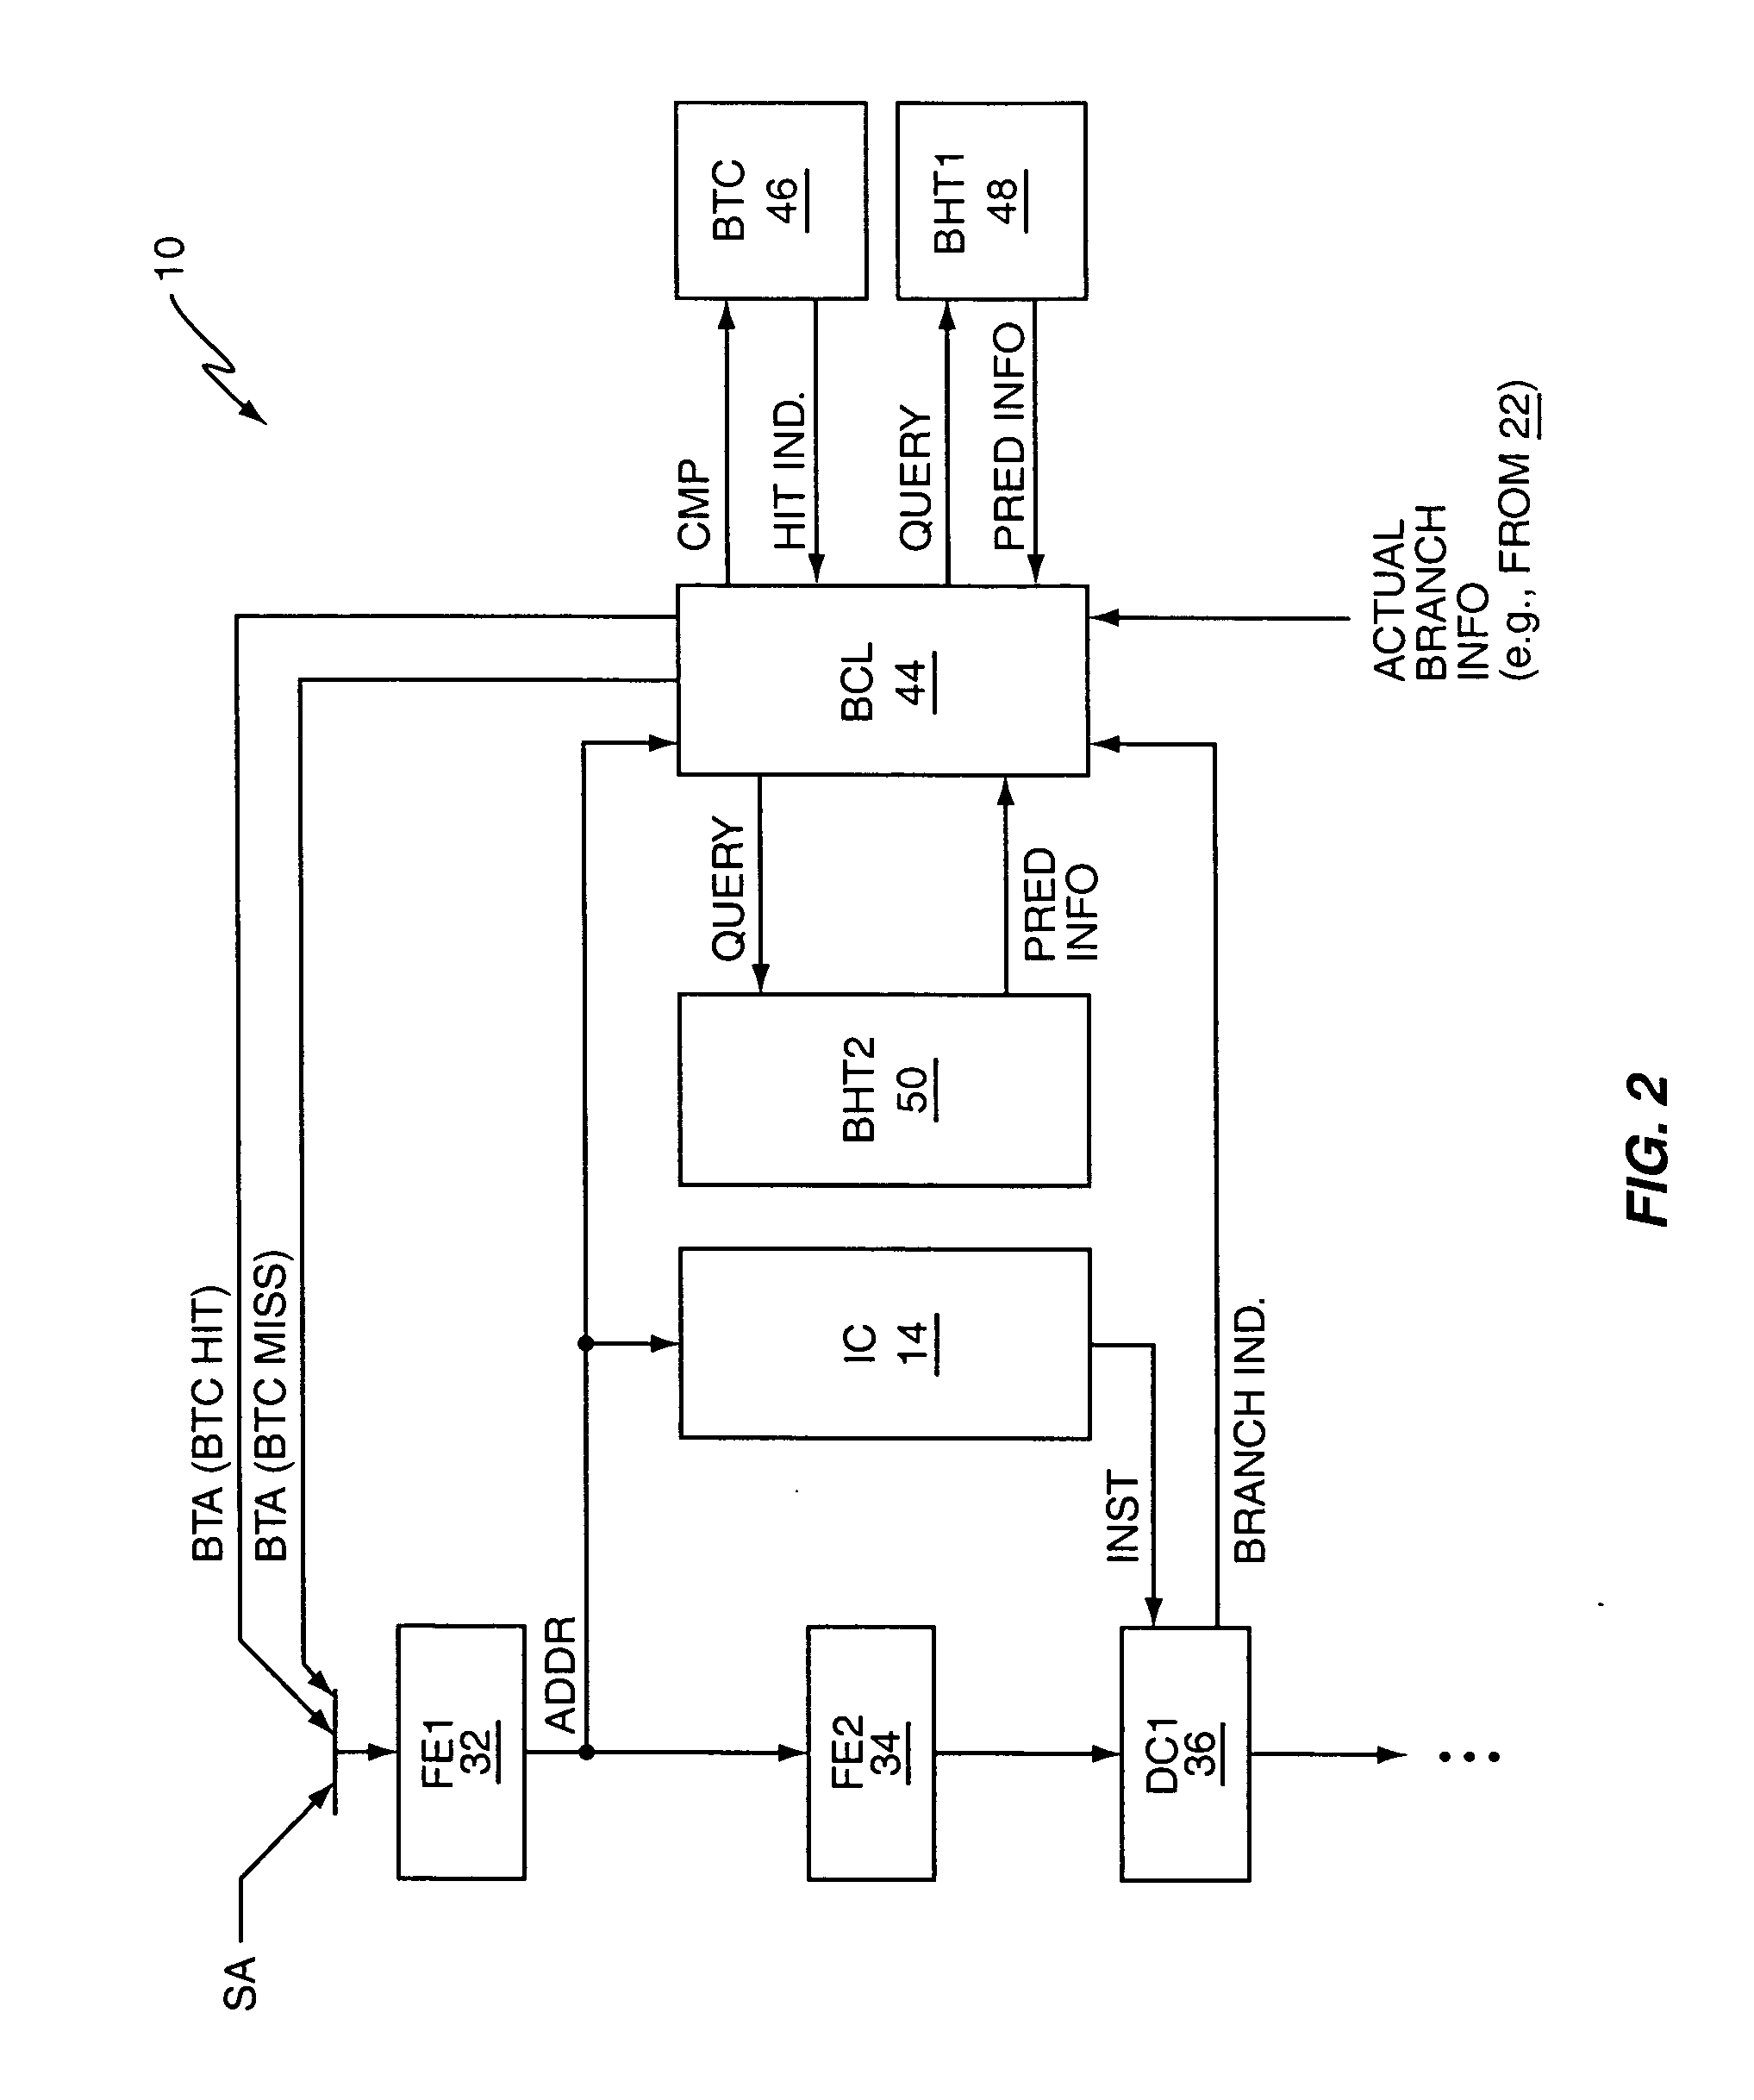 Method and apparatus for predicting branch instructions